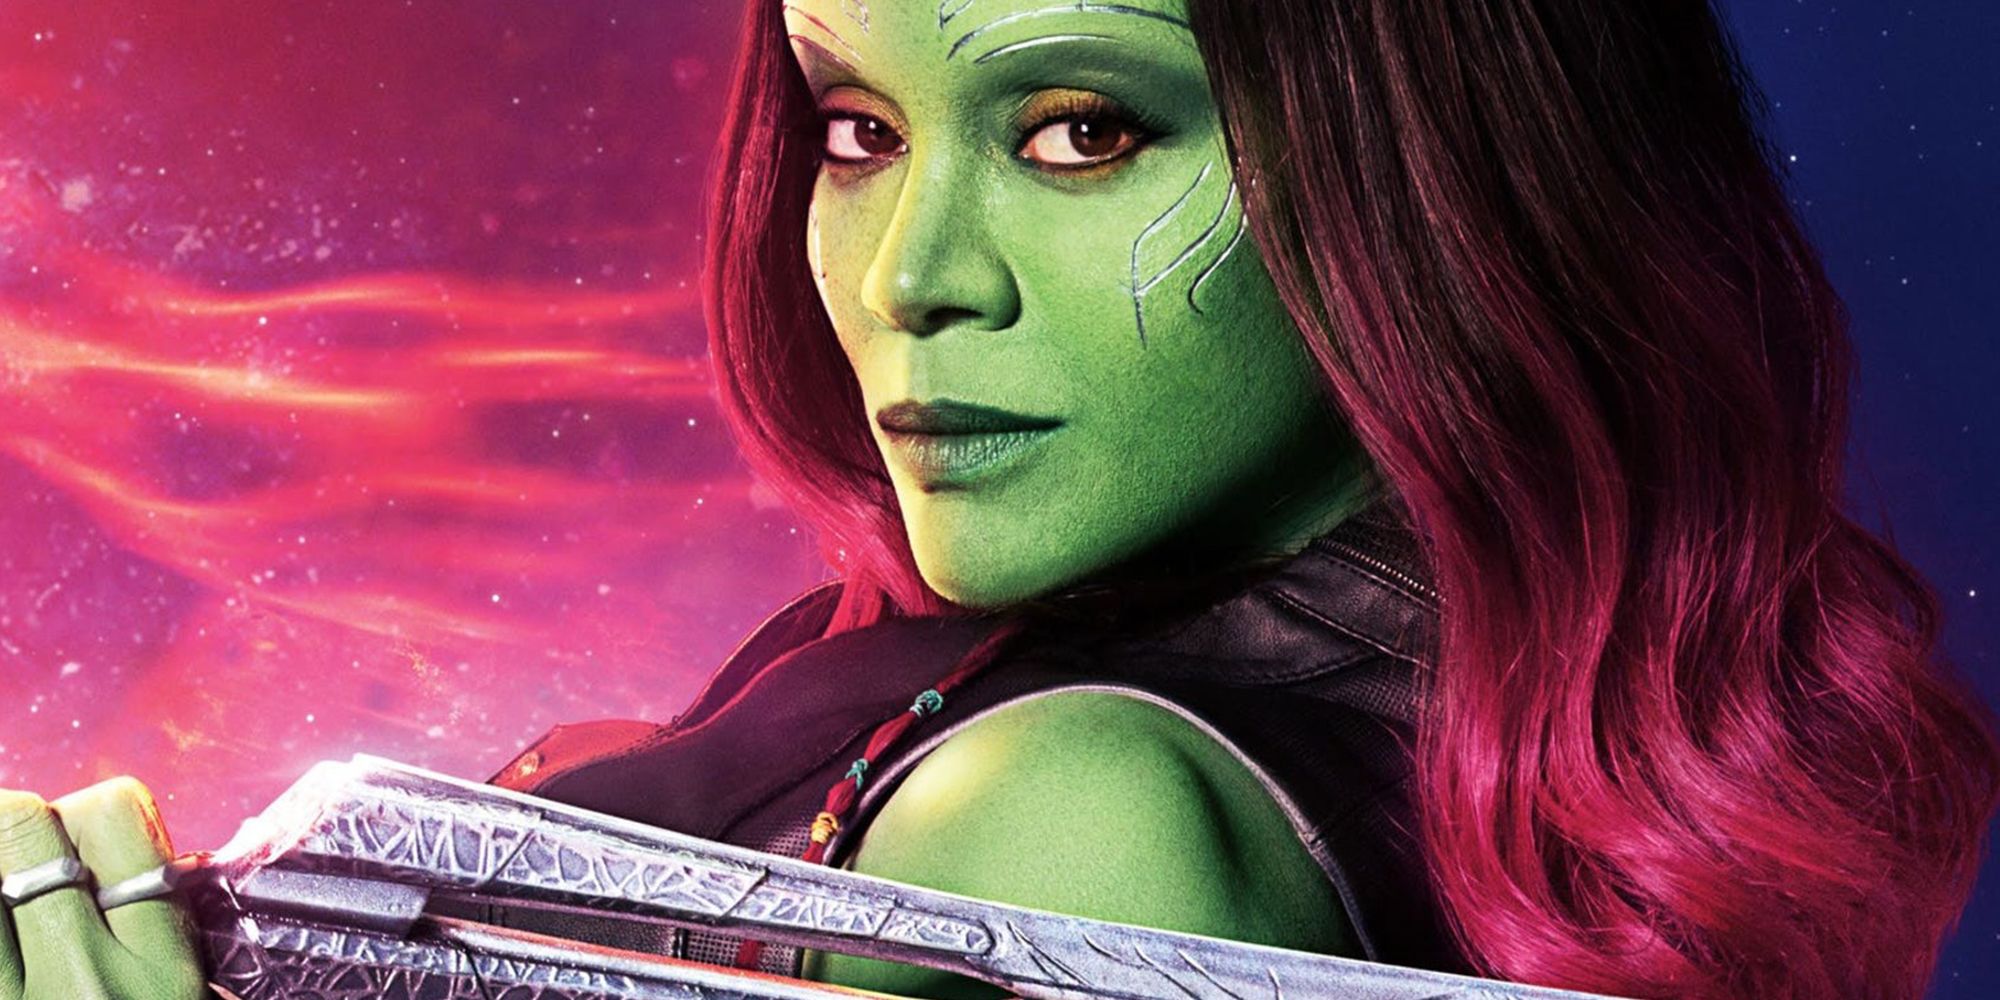 Will Gamora rejoin the Guardians of the Galaxy in Vol. 3?